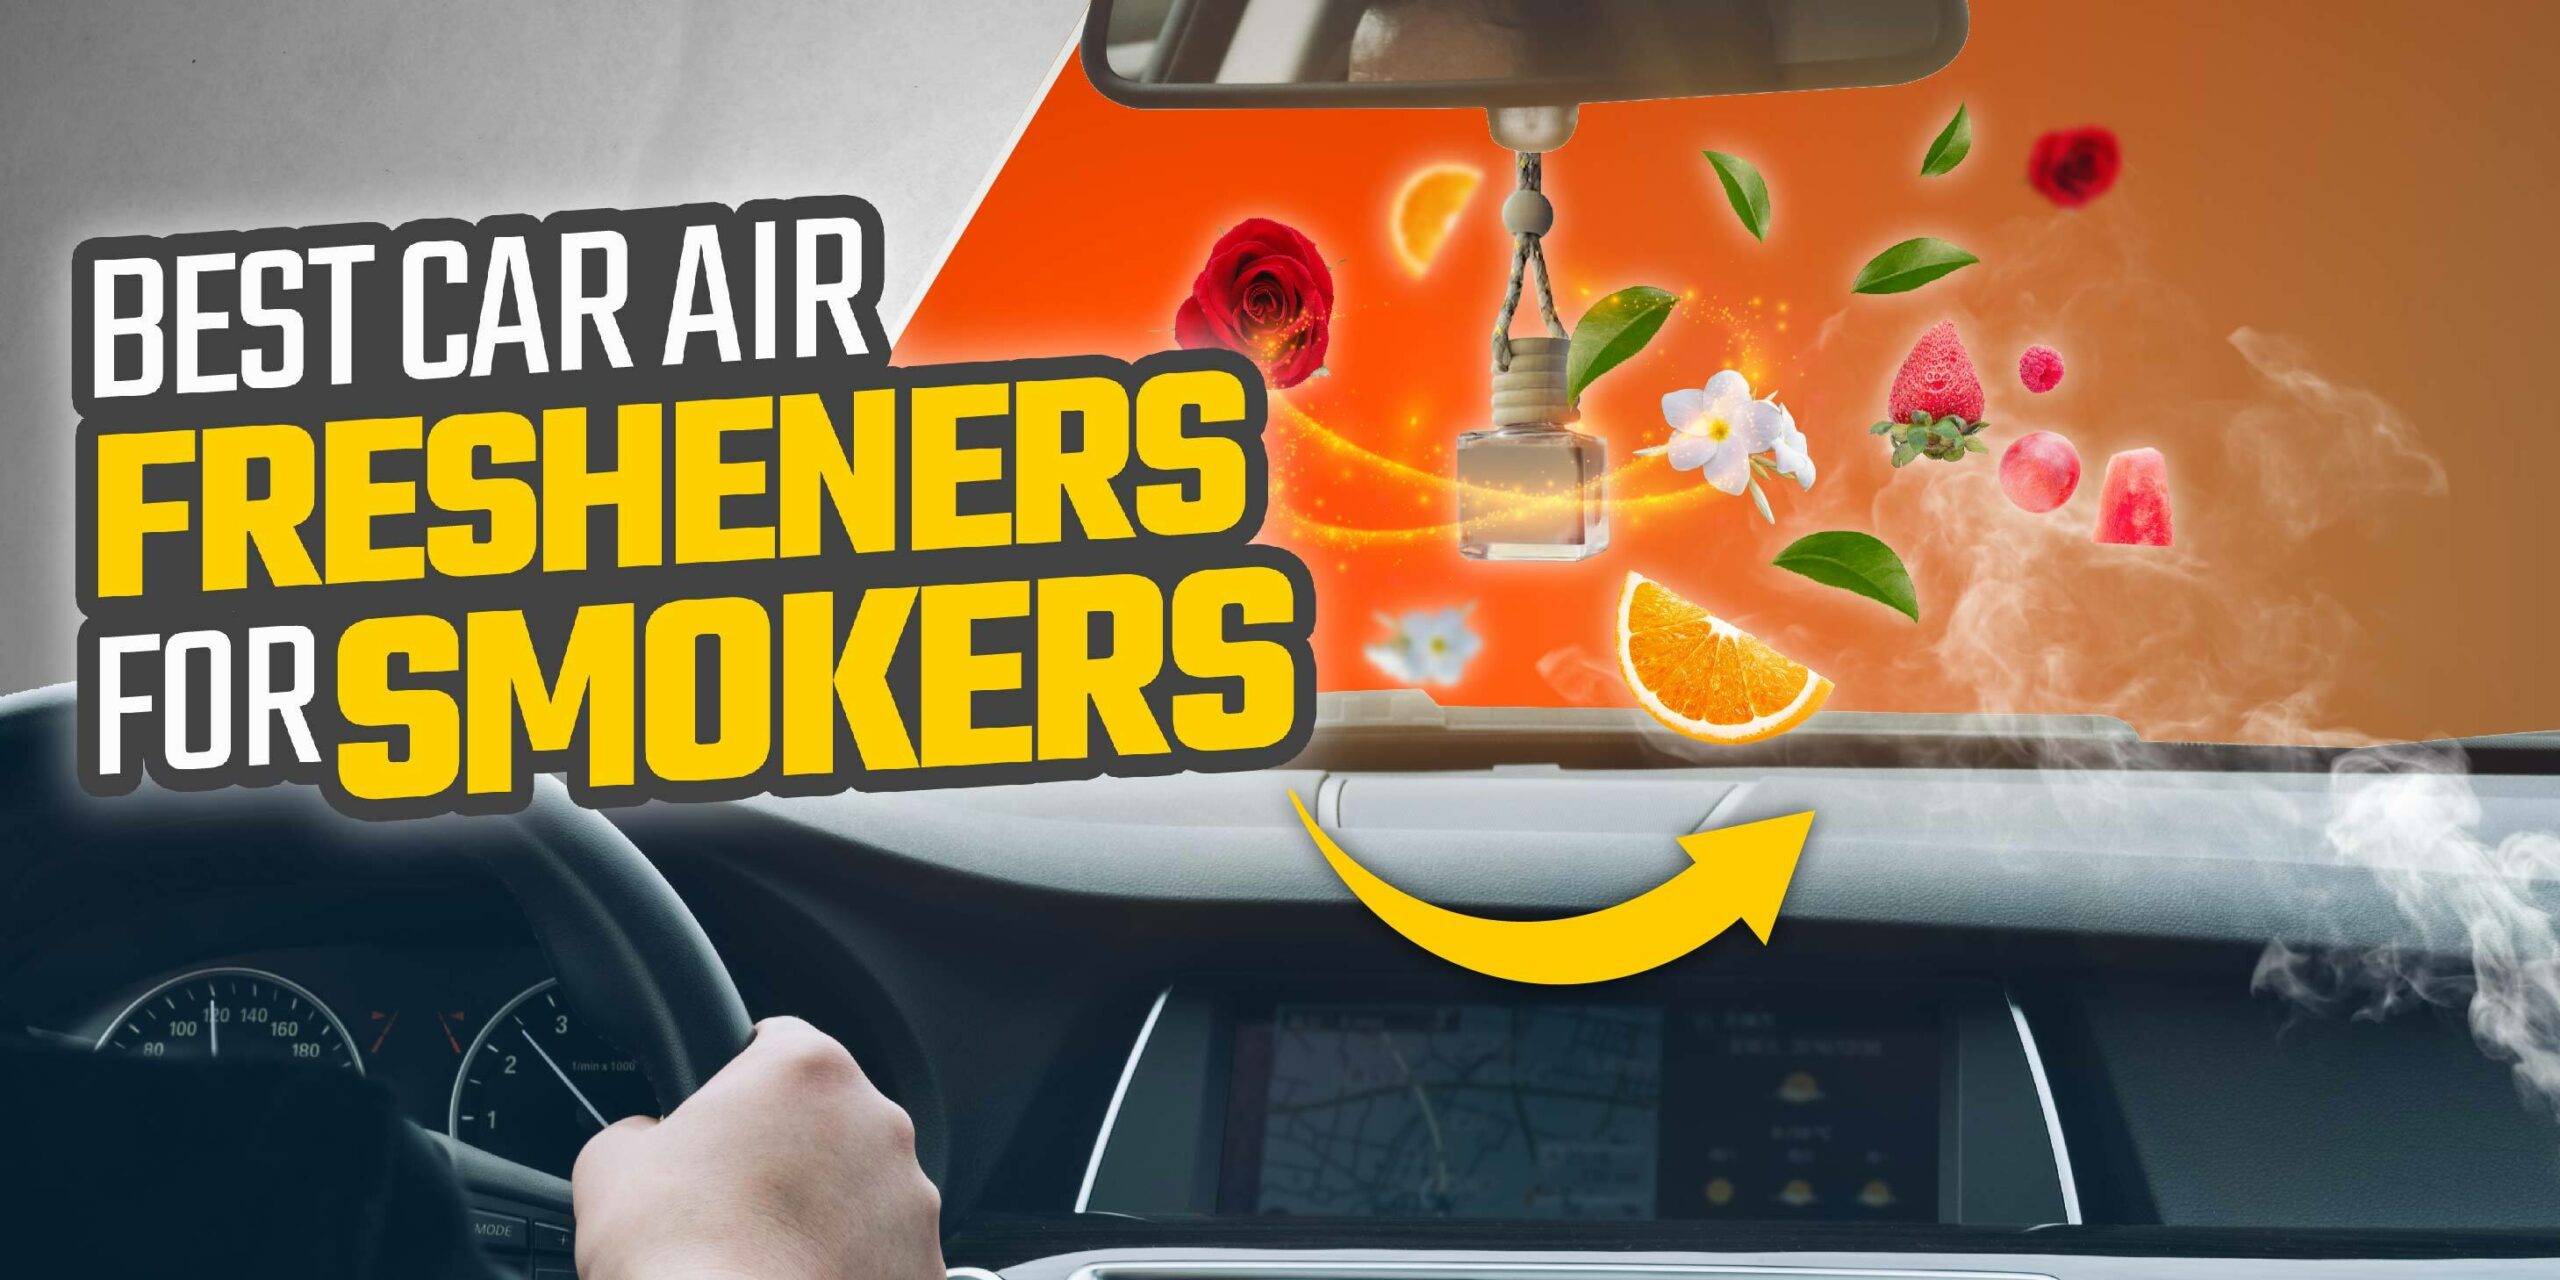 Best Car Air Fresheners For Smokers